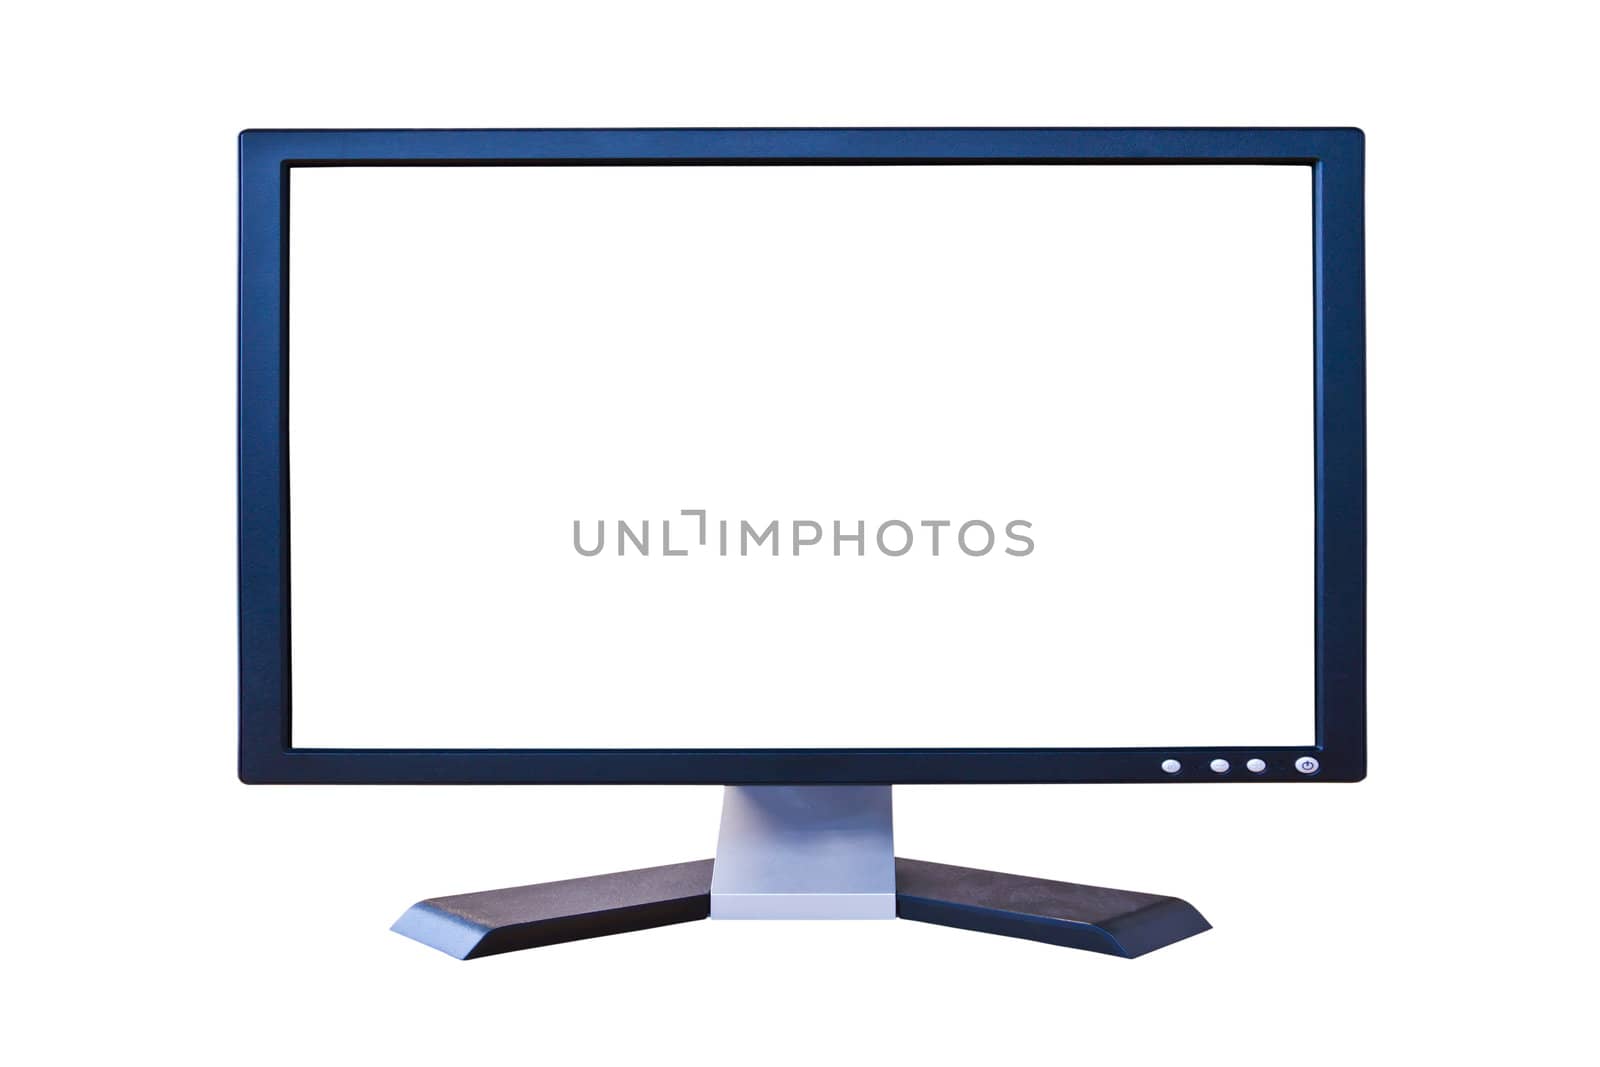 wide screen LCD monitor with blank screen